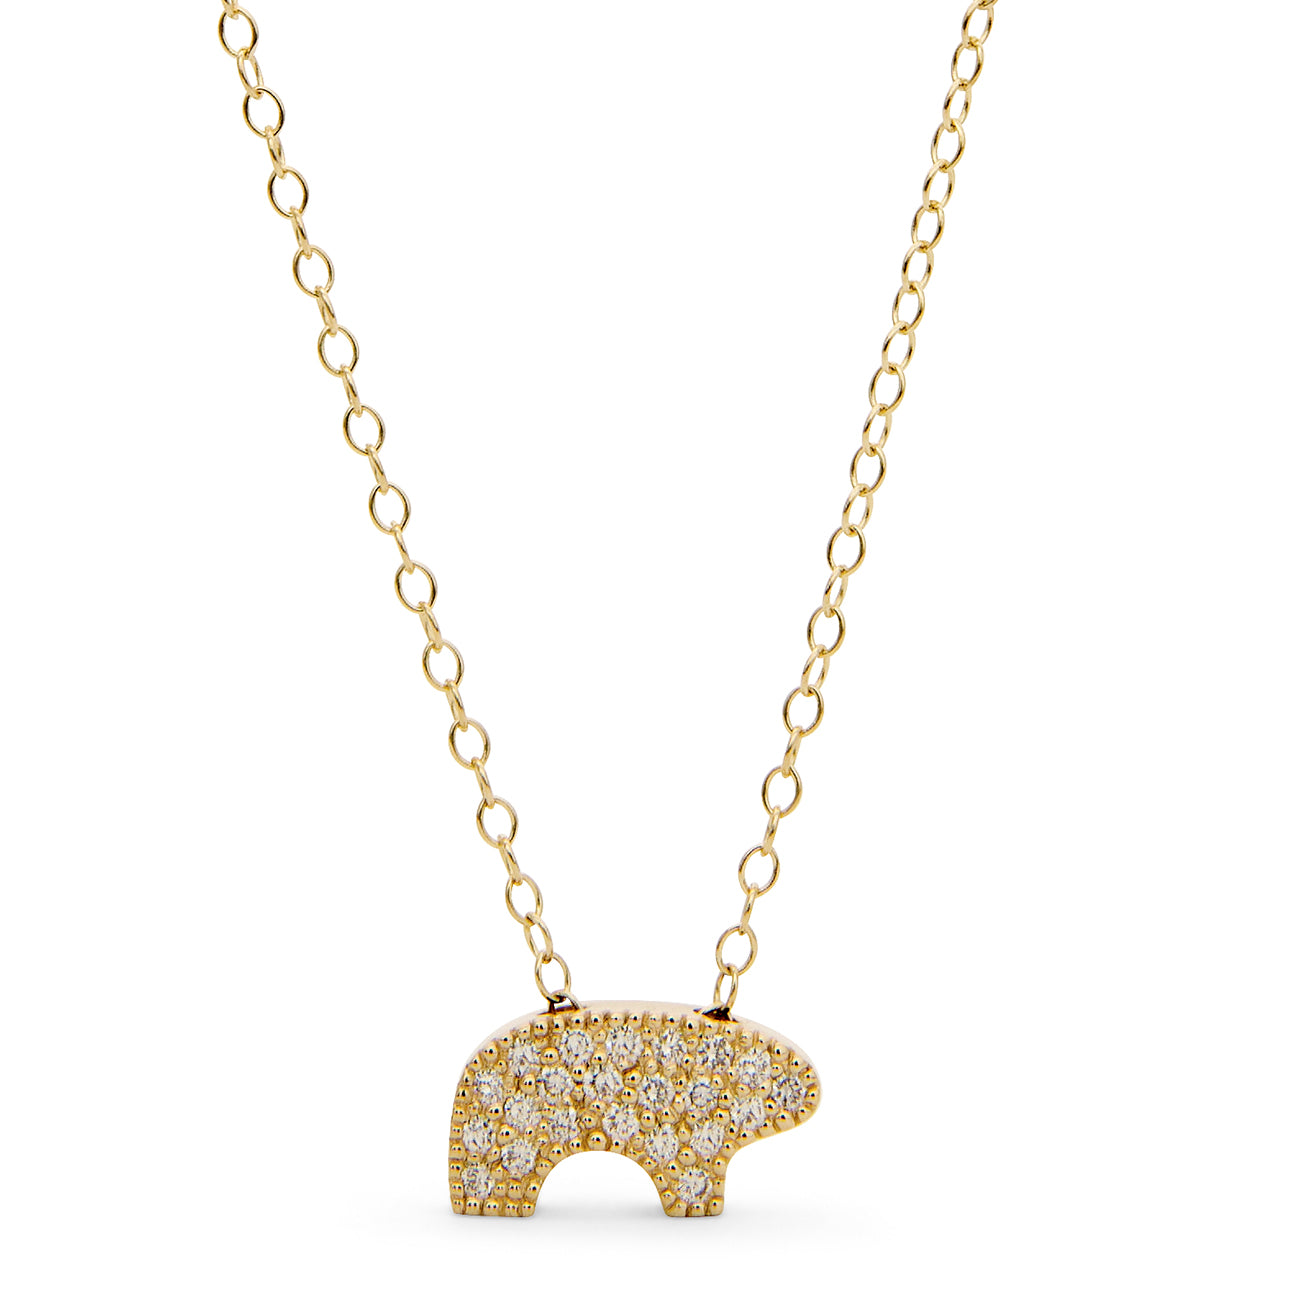 10k Solid Gold Teddy Bear Pendant Necklace – Fran & Co. Jewelry Inc.